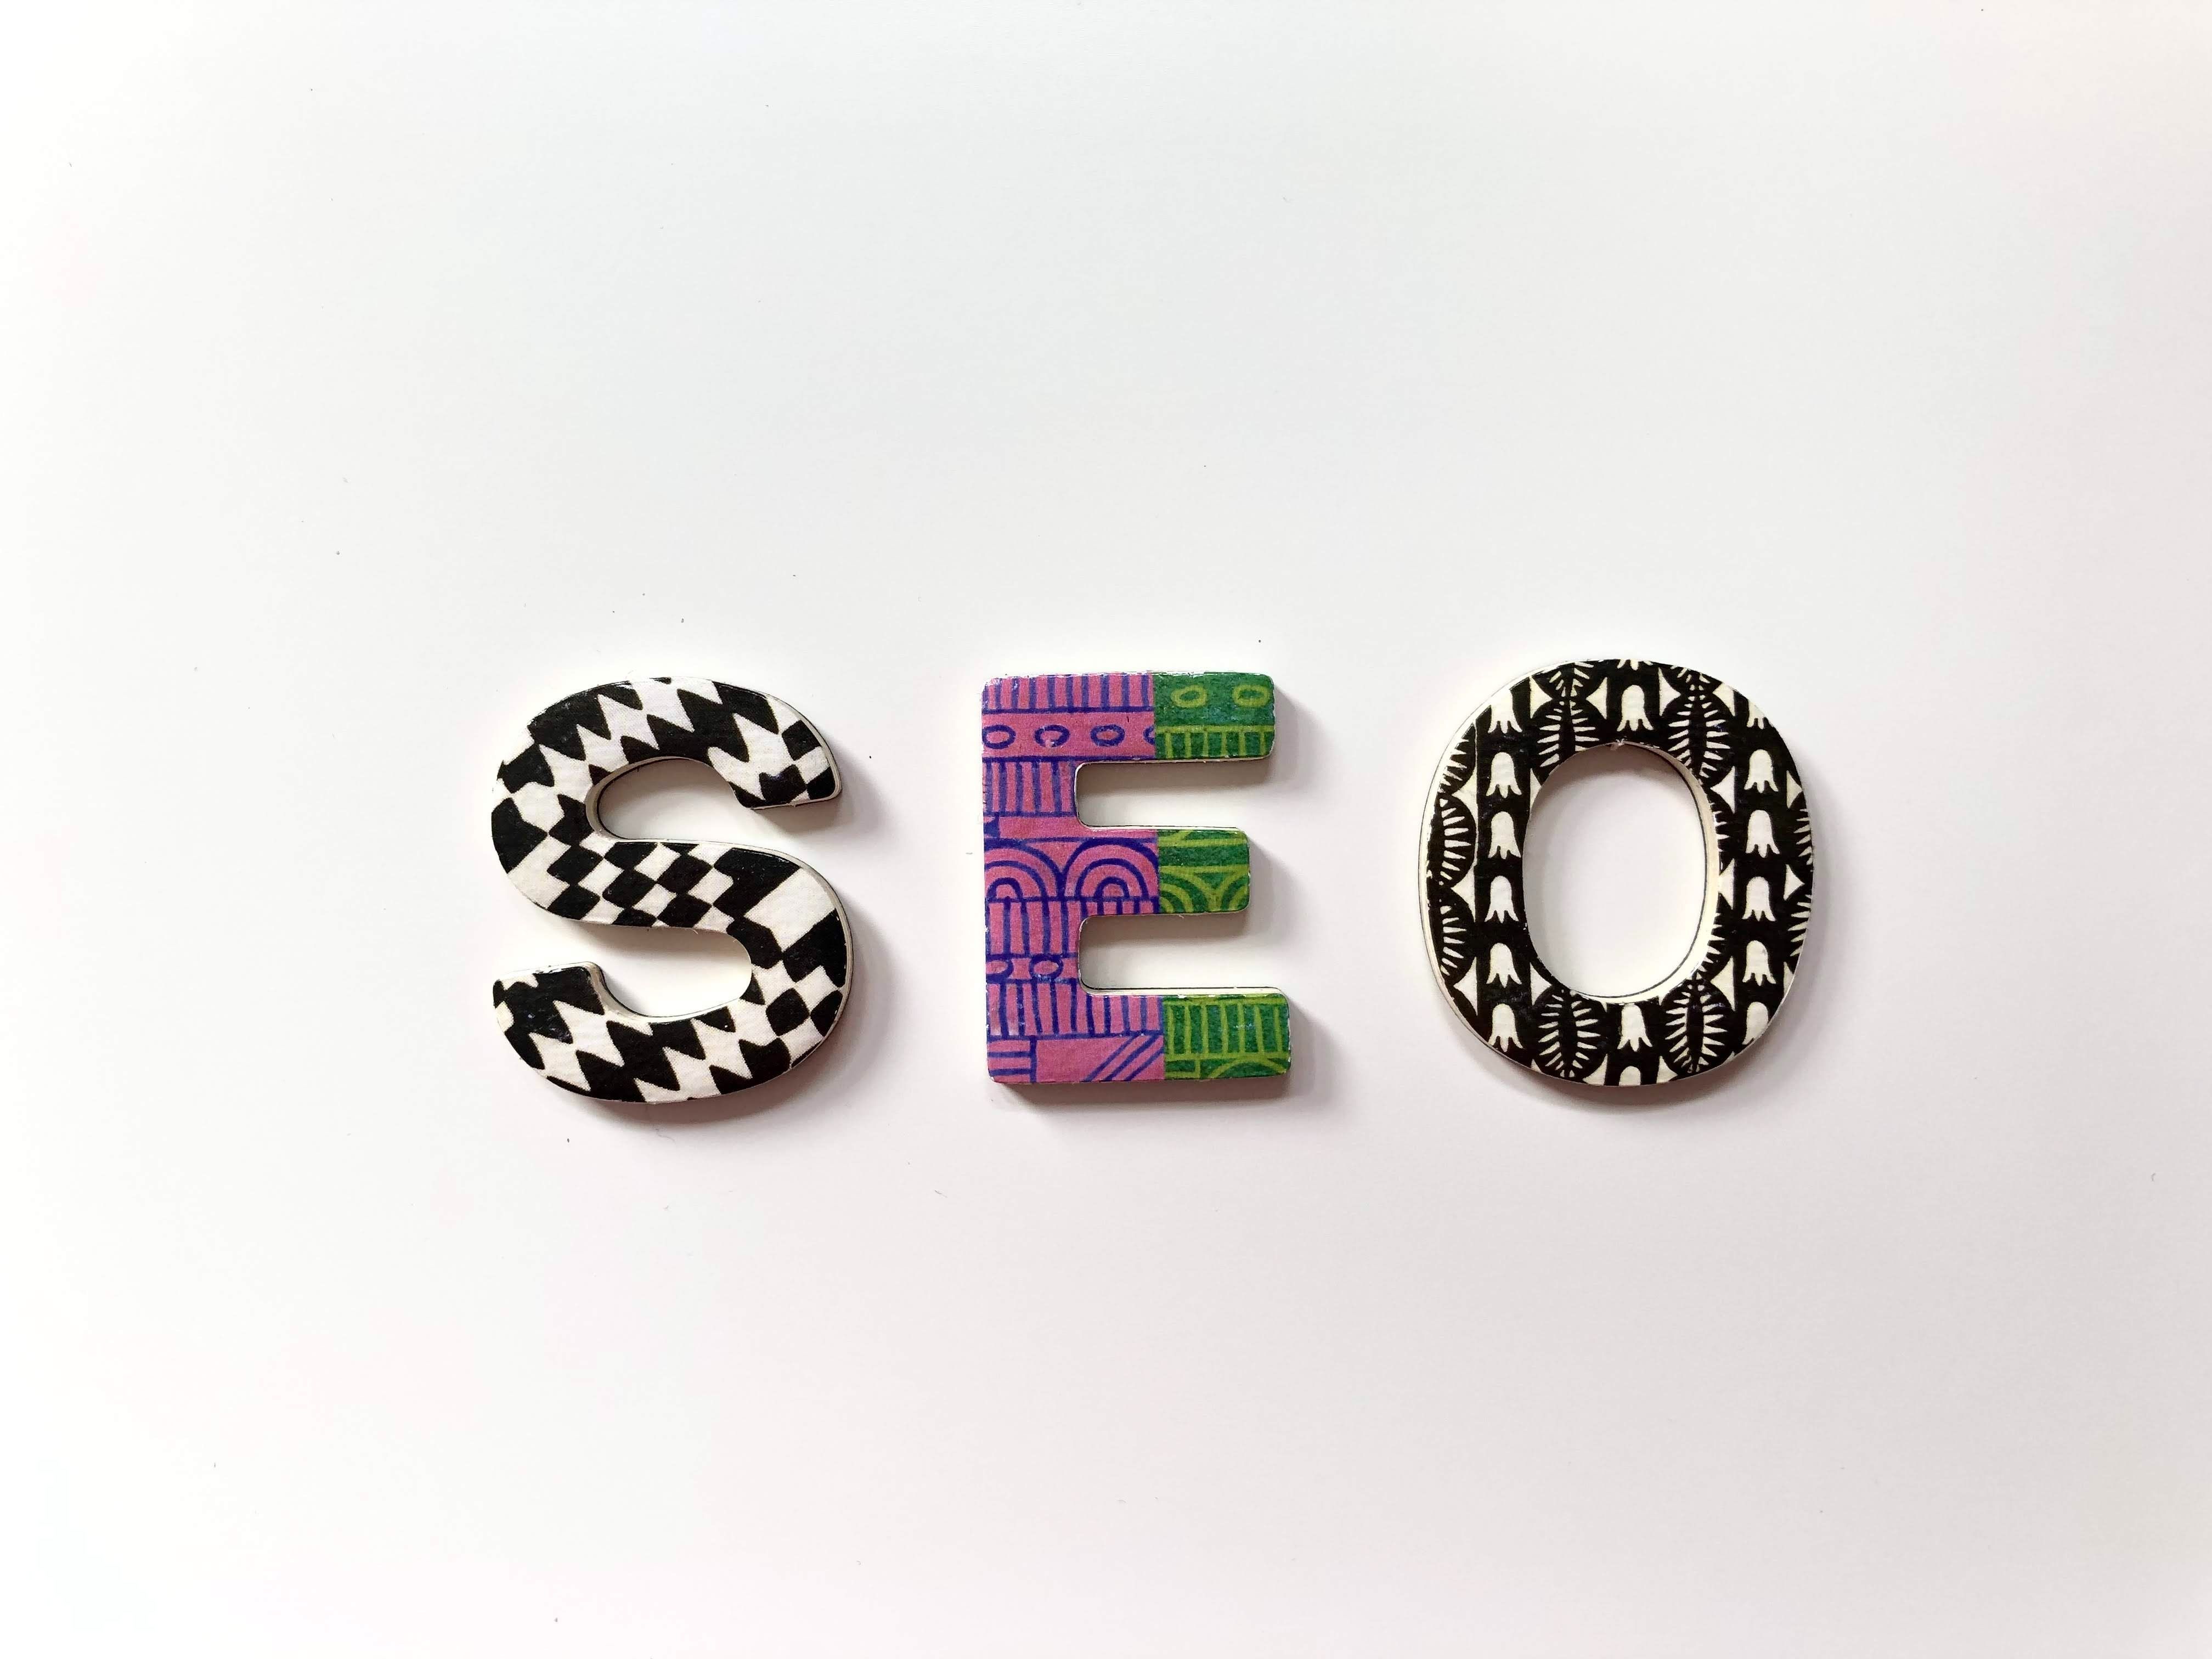 SEO capital letters with a graphic pattern